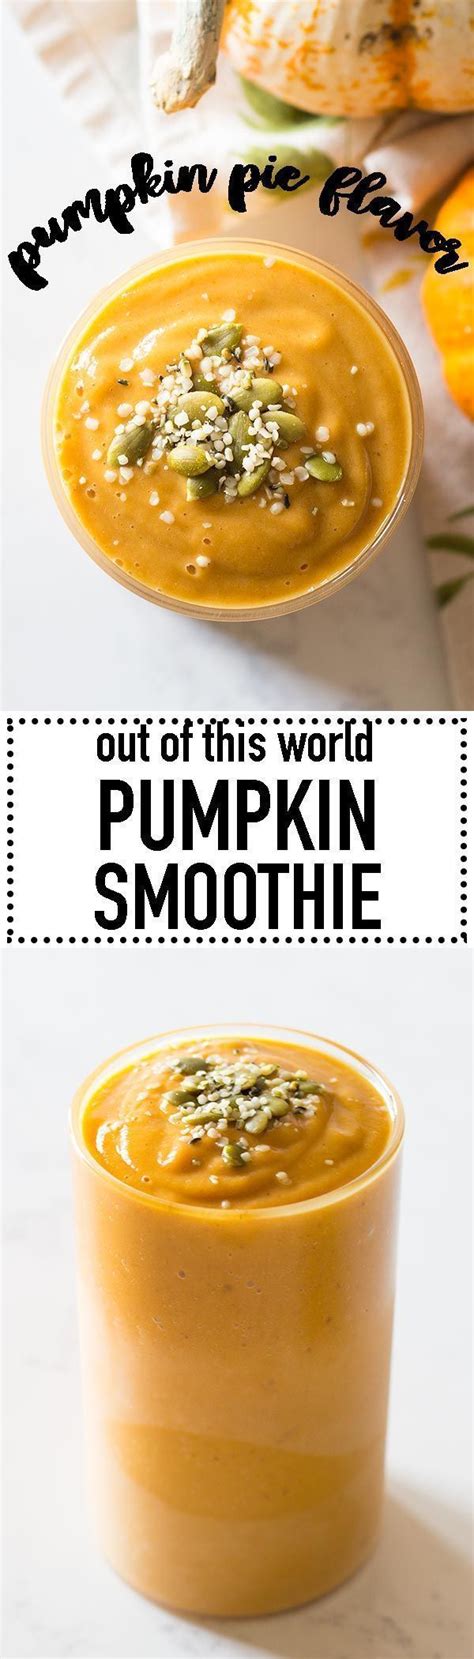 This Healthy Pumpkin Smoothie Is Out Of This World A Paleo And Vegan